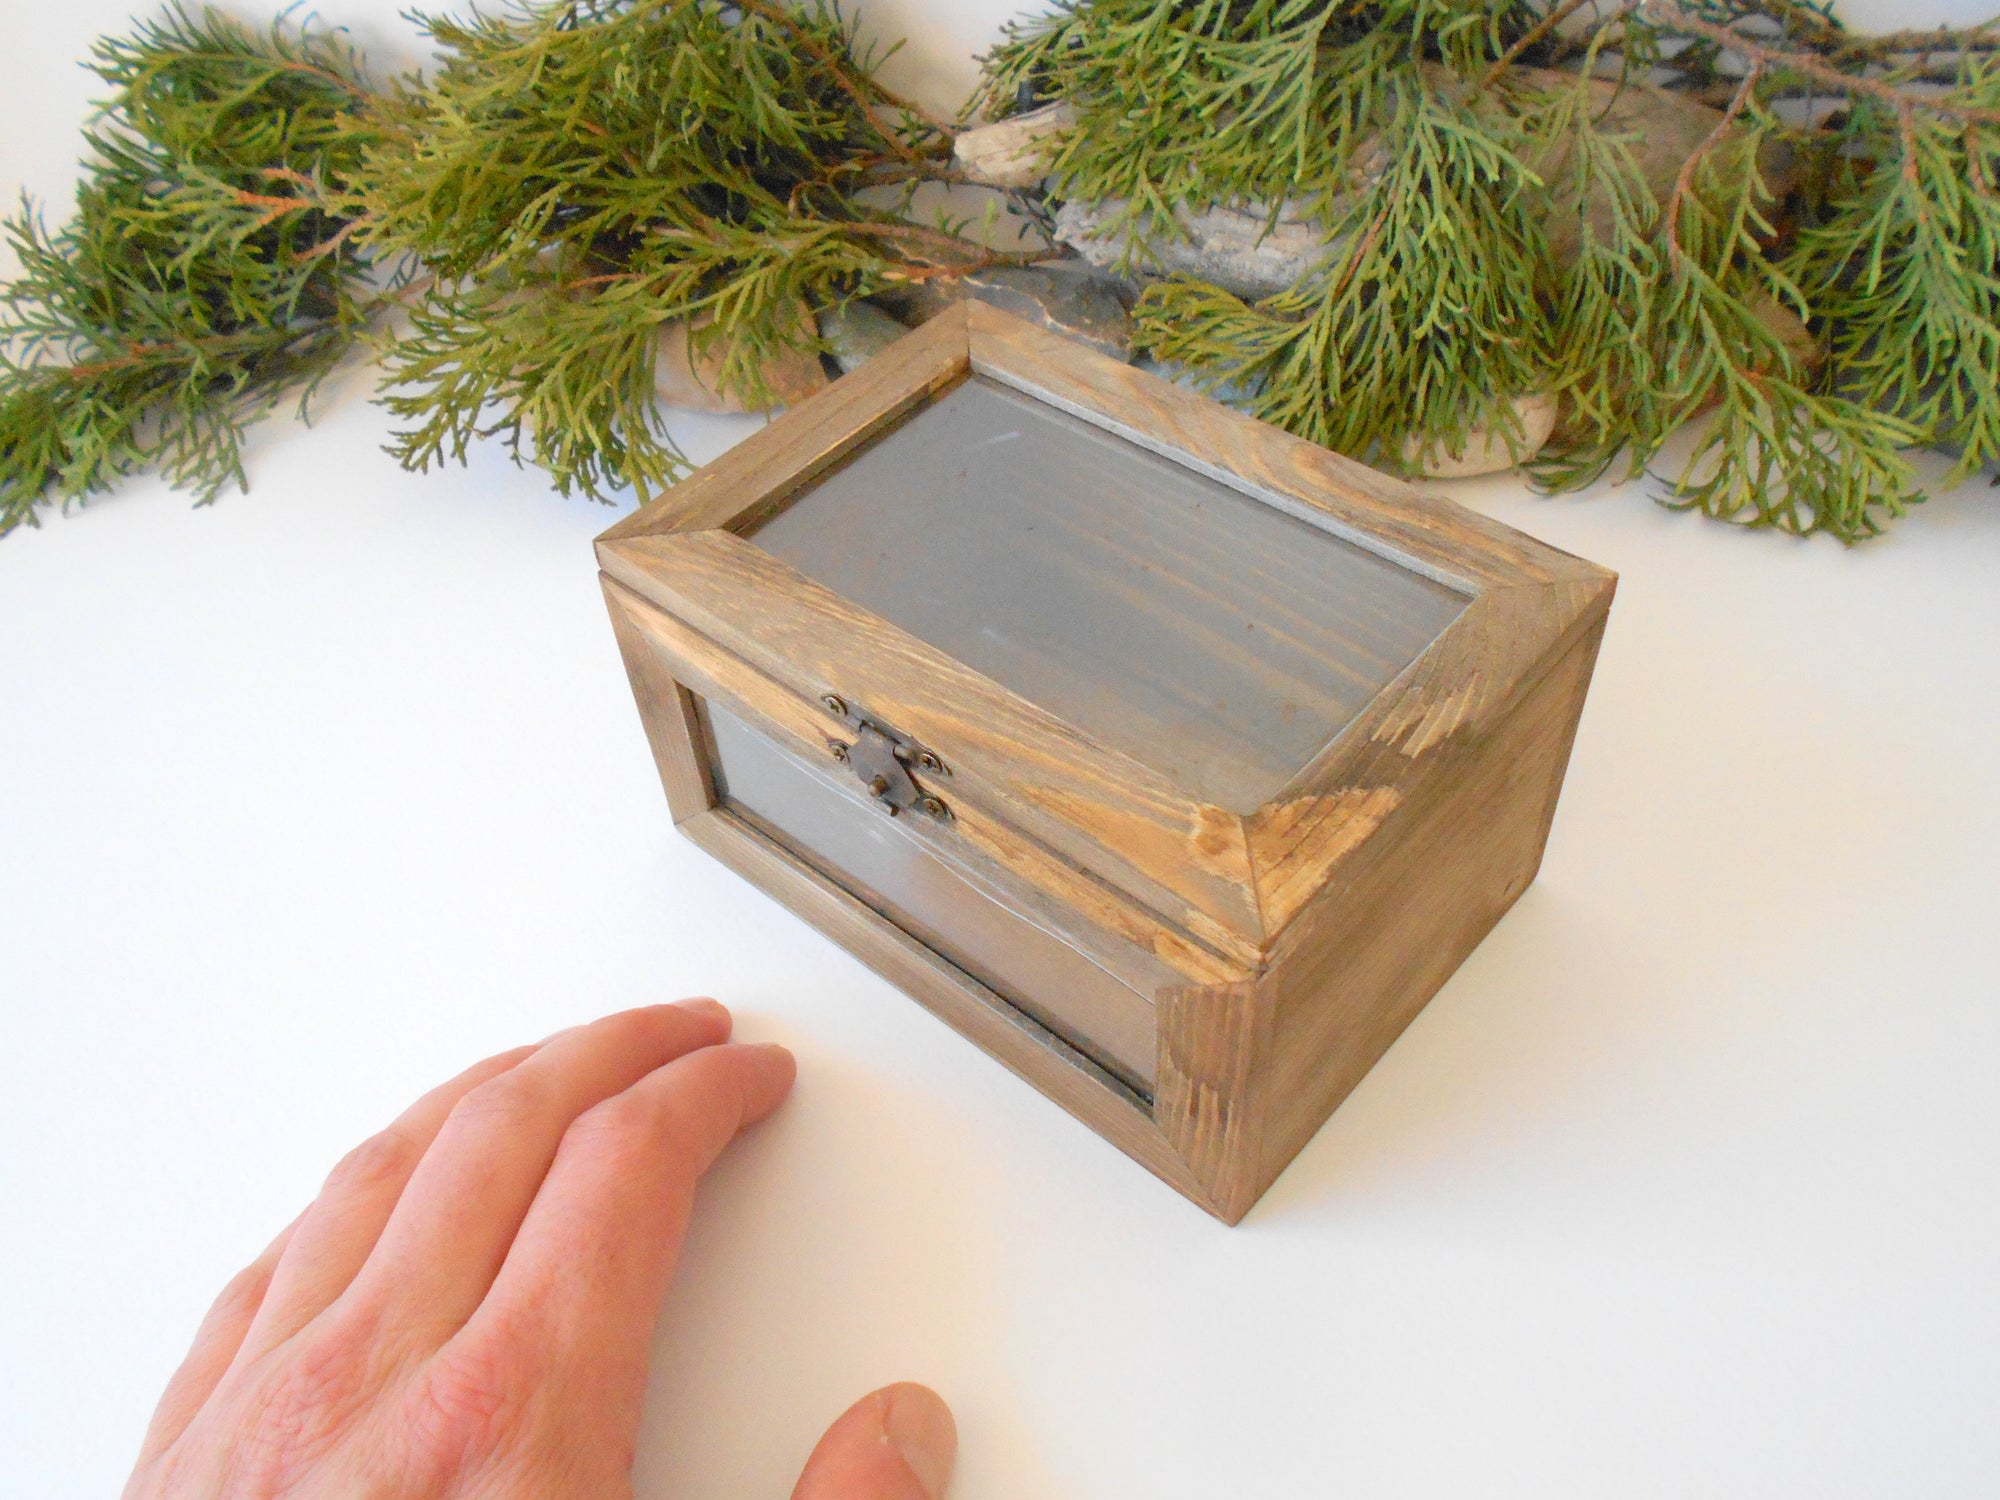 This small wooden display box is made of pinewood and has metal hinges with bronze color and the cap has 2 plastic displays so you can see what it's inside.&nbsp; The second window is on the front side of the box too. It has thick wooden walls and is quality made with fine pine wood materials.